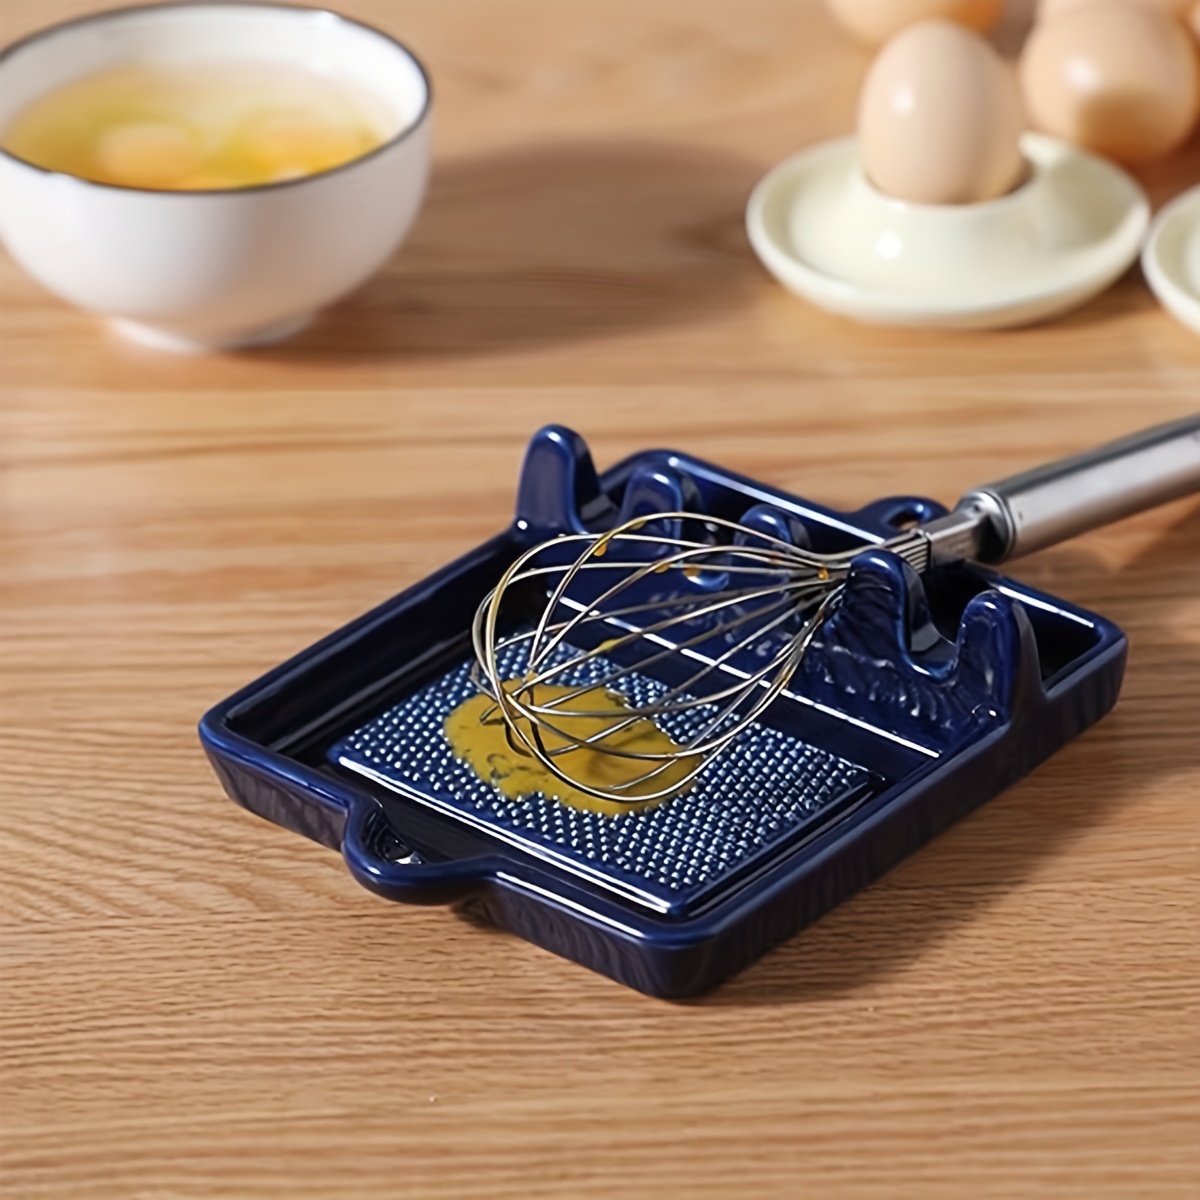 Hold Everything Ceramic Garlic Keeper with Grater Plate